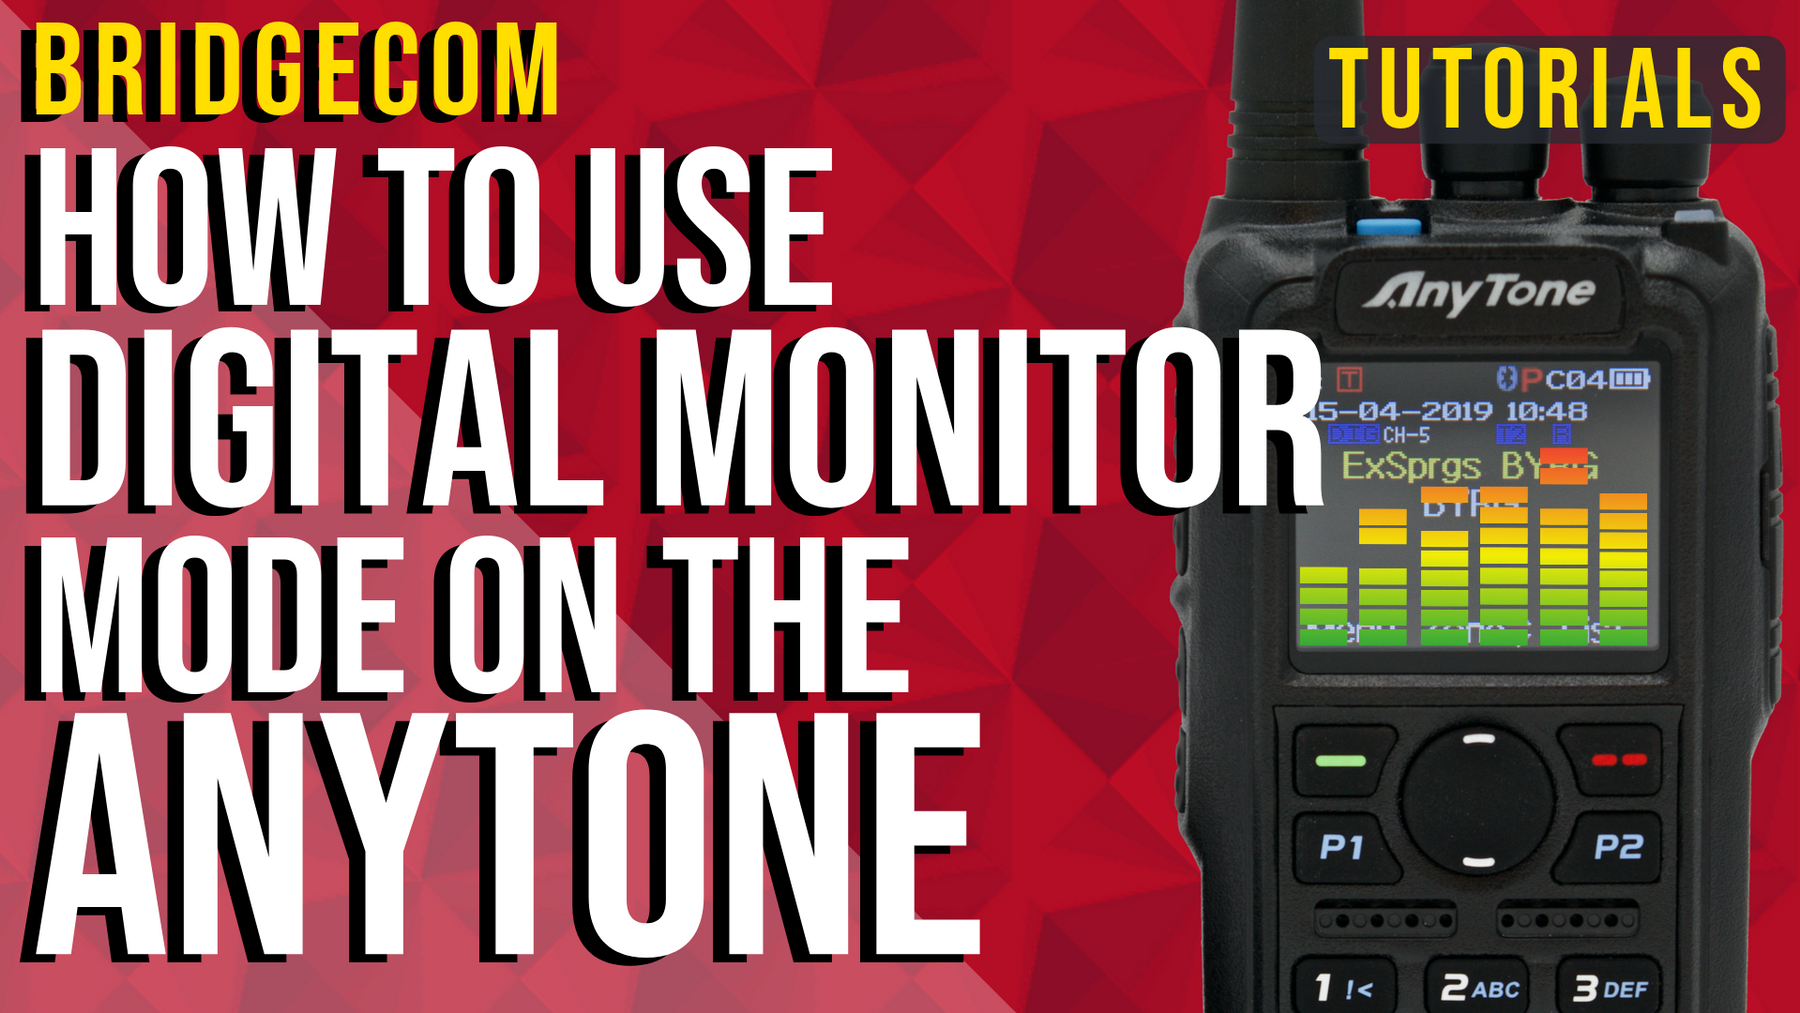 How To Use Digital Monitor Mode on the AnyTone by fdnyfish.